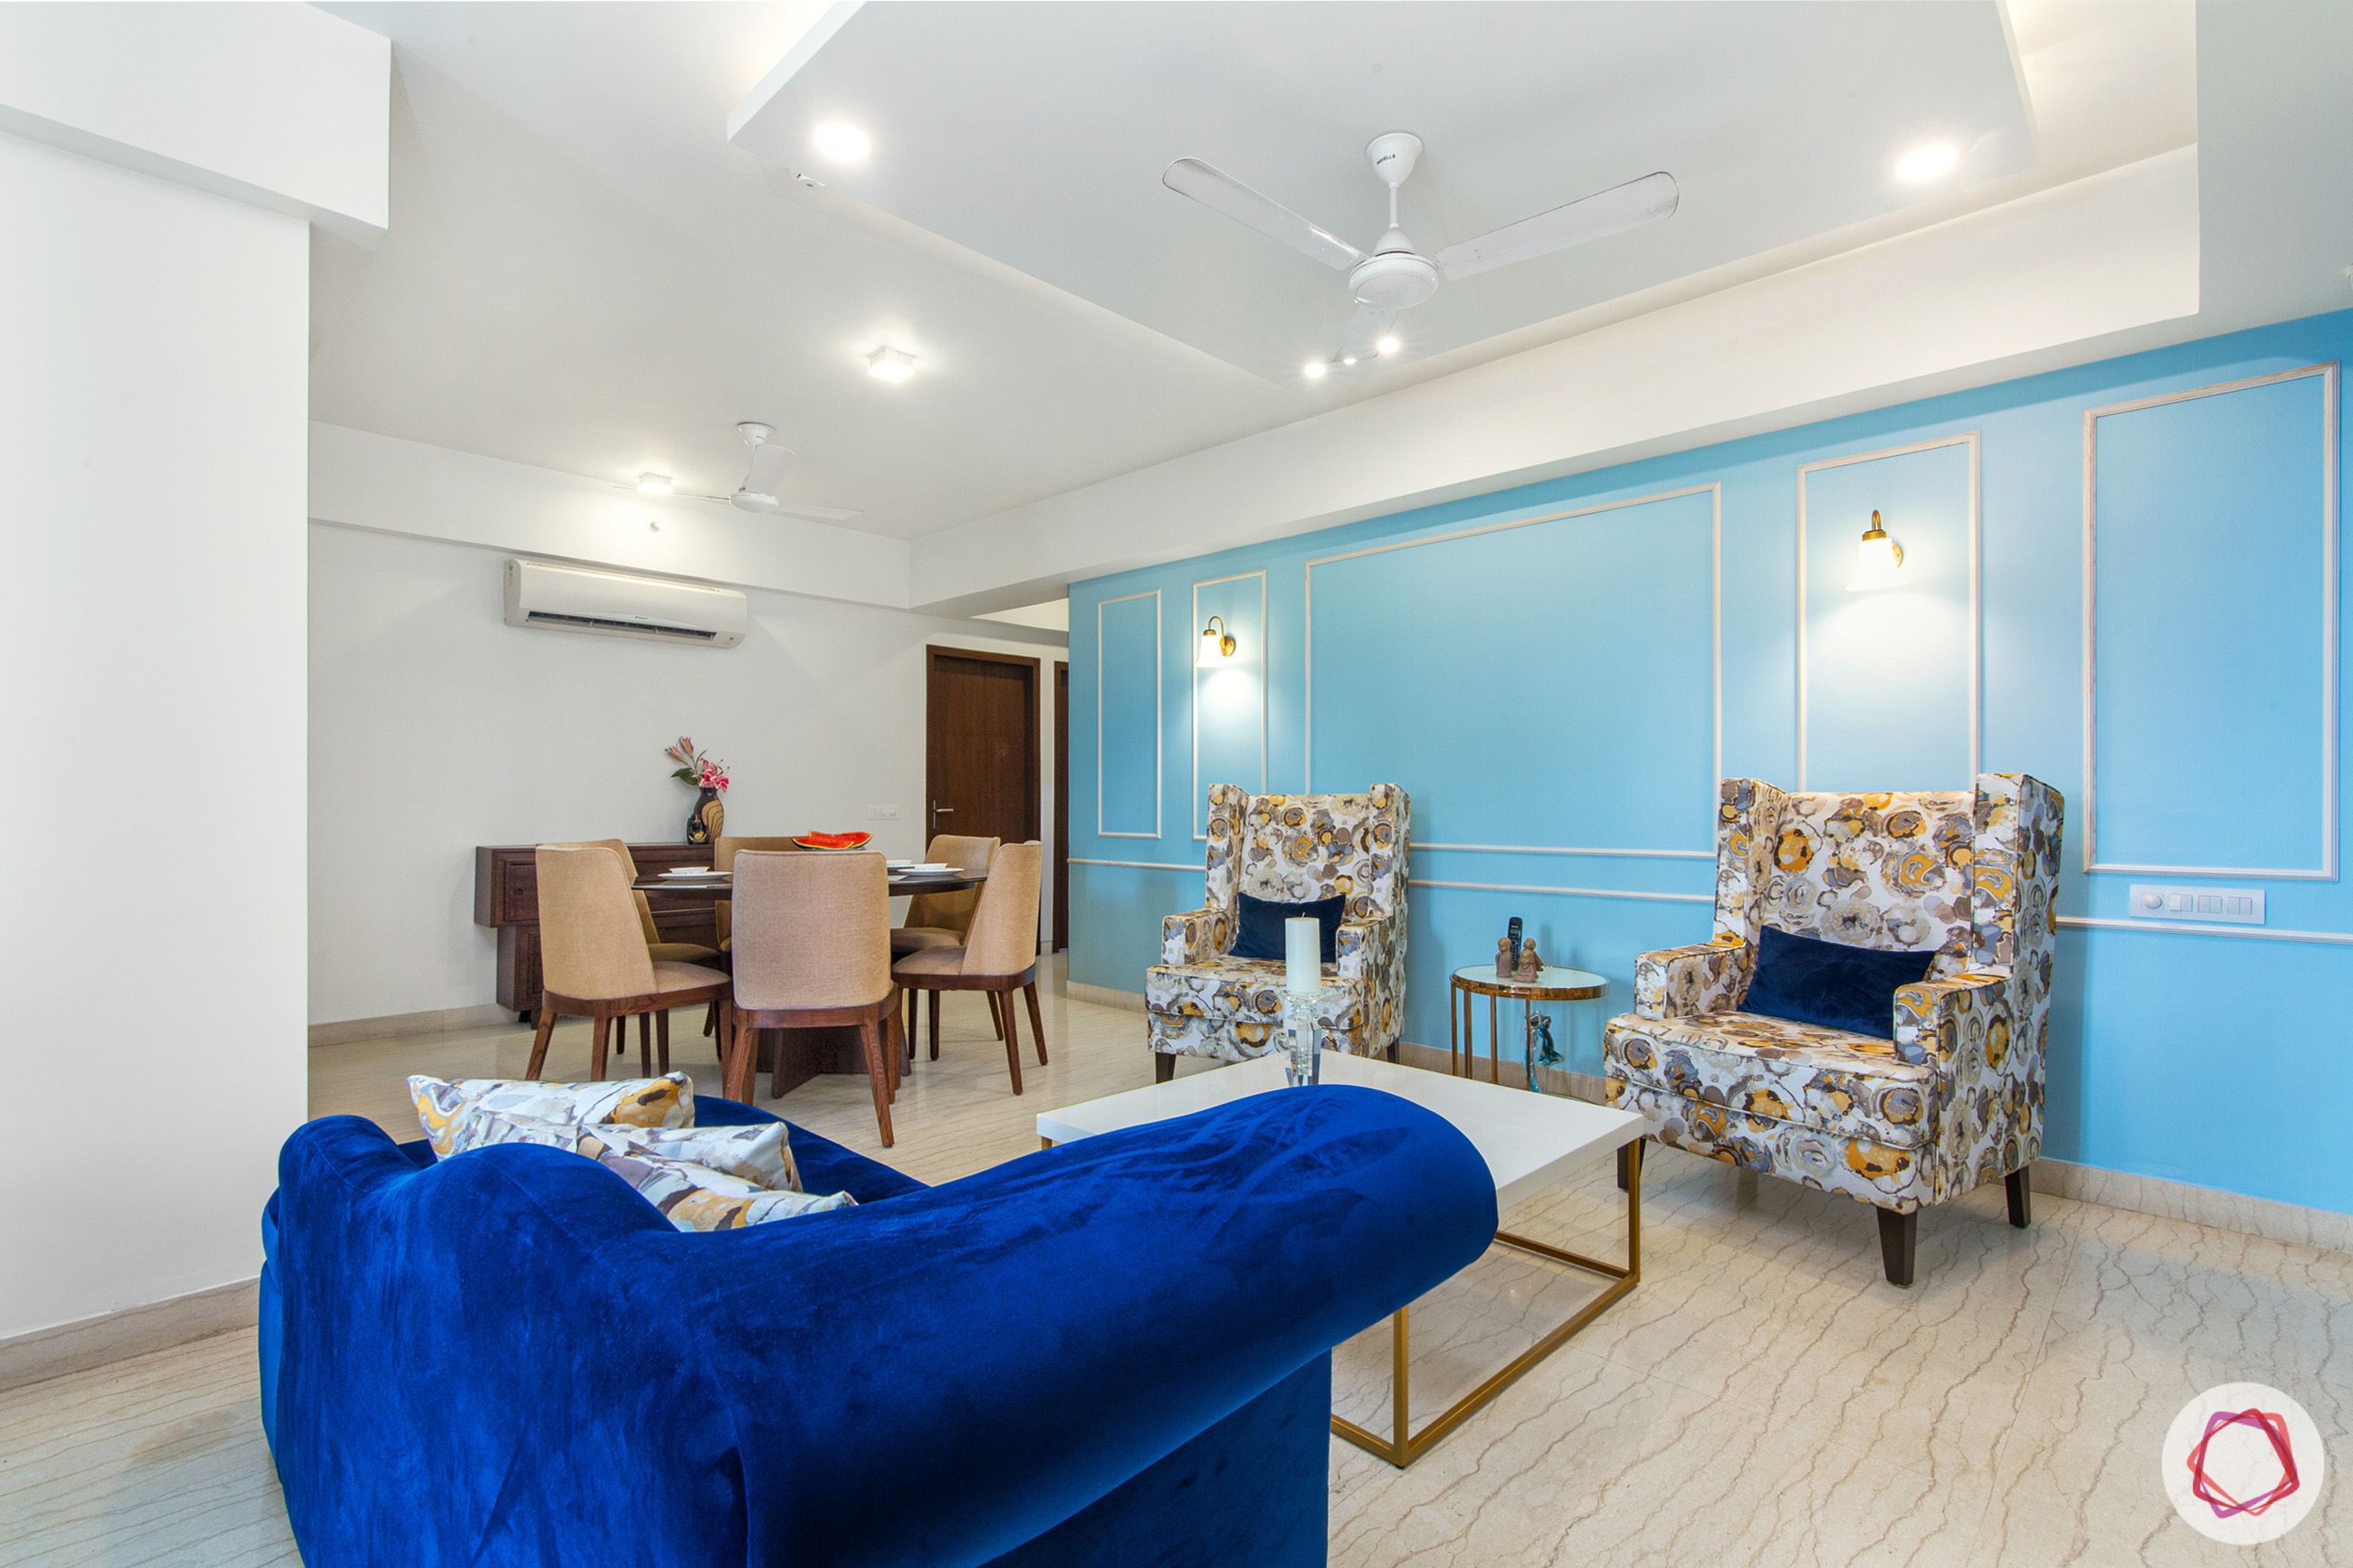 house in gurgaon-blue wall ideas-white centre table designs